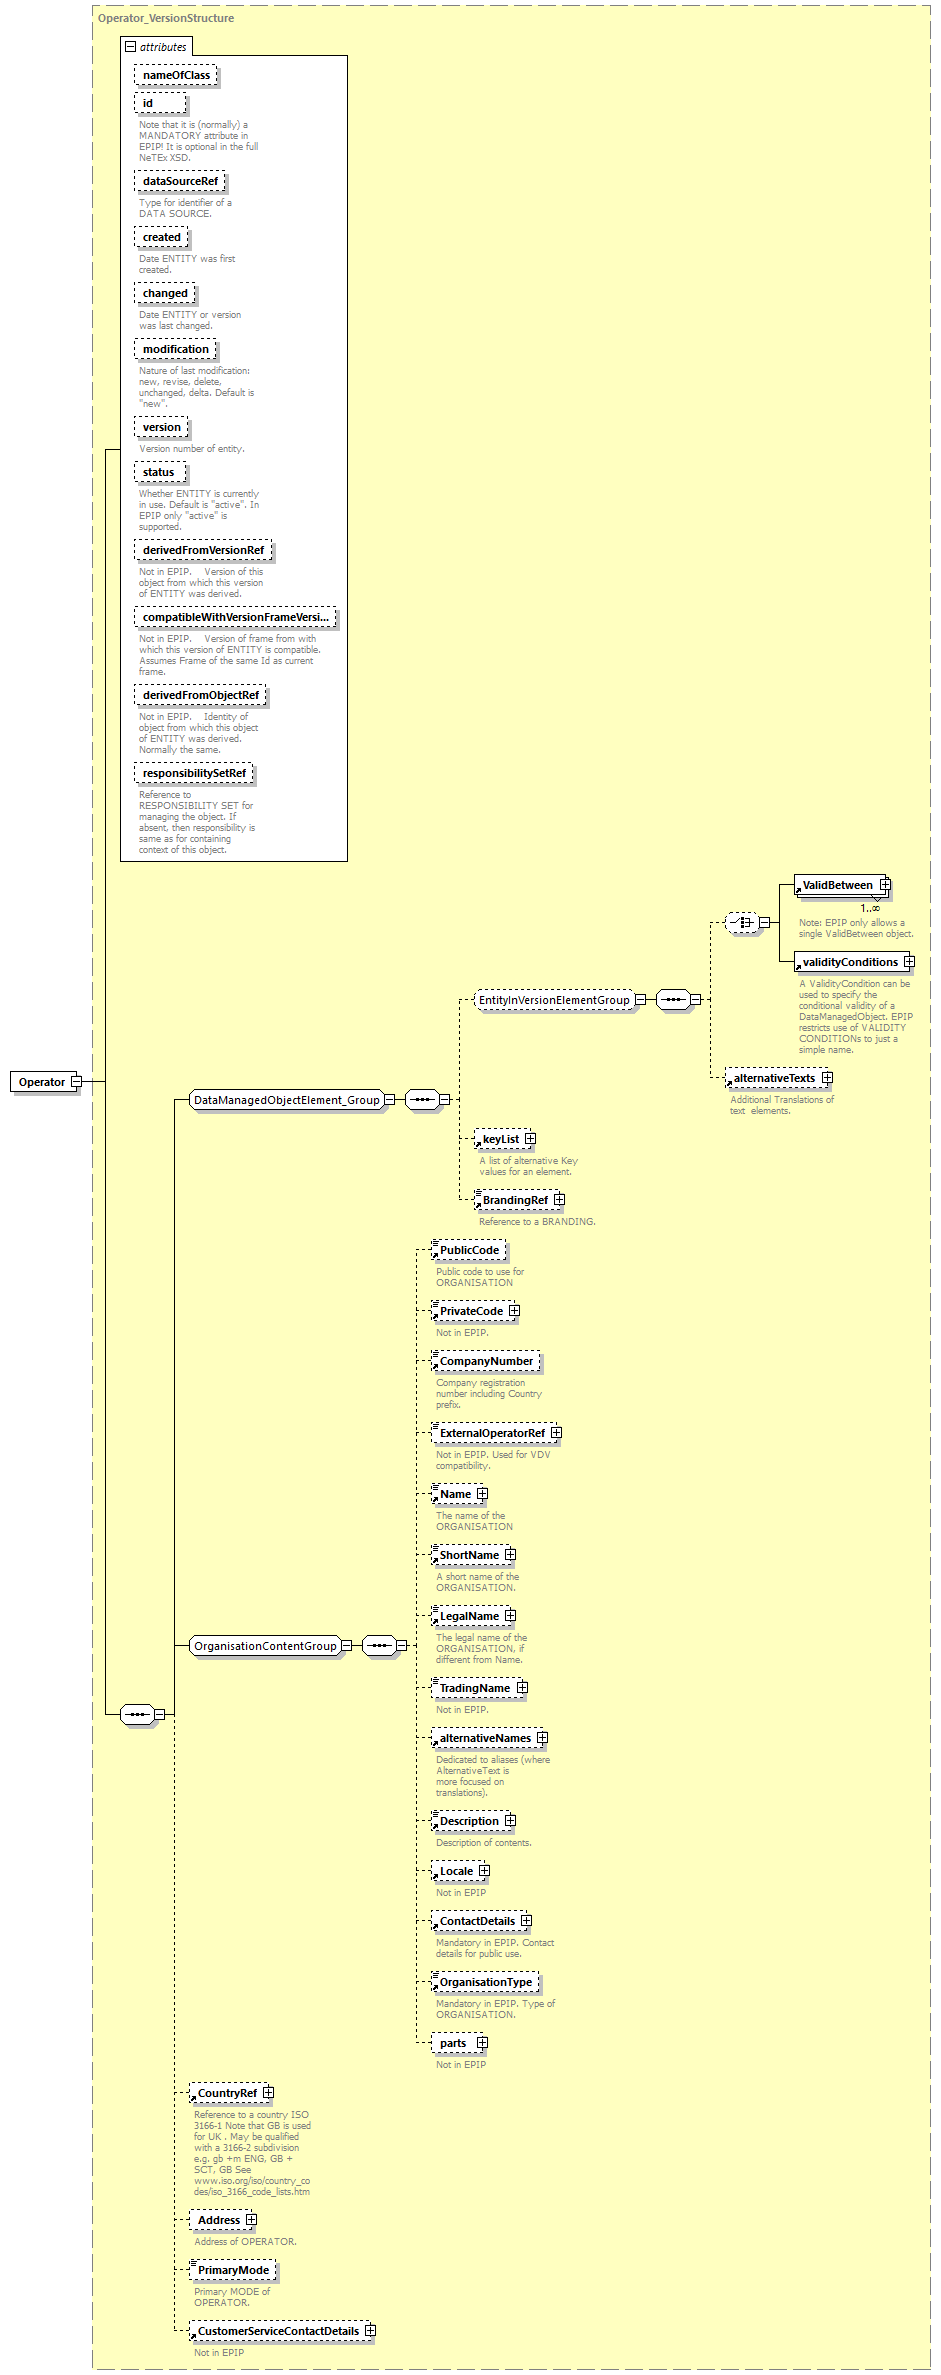 reduced_diagrams/reduced_p293.png